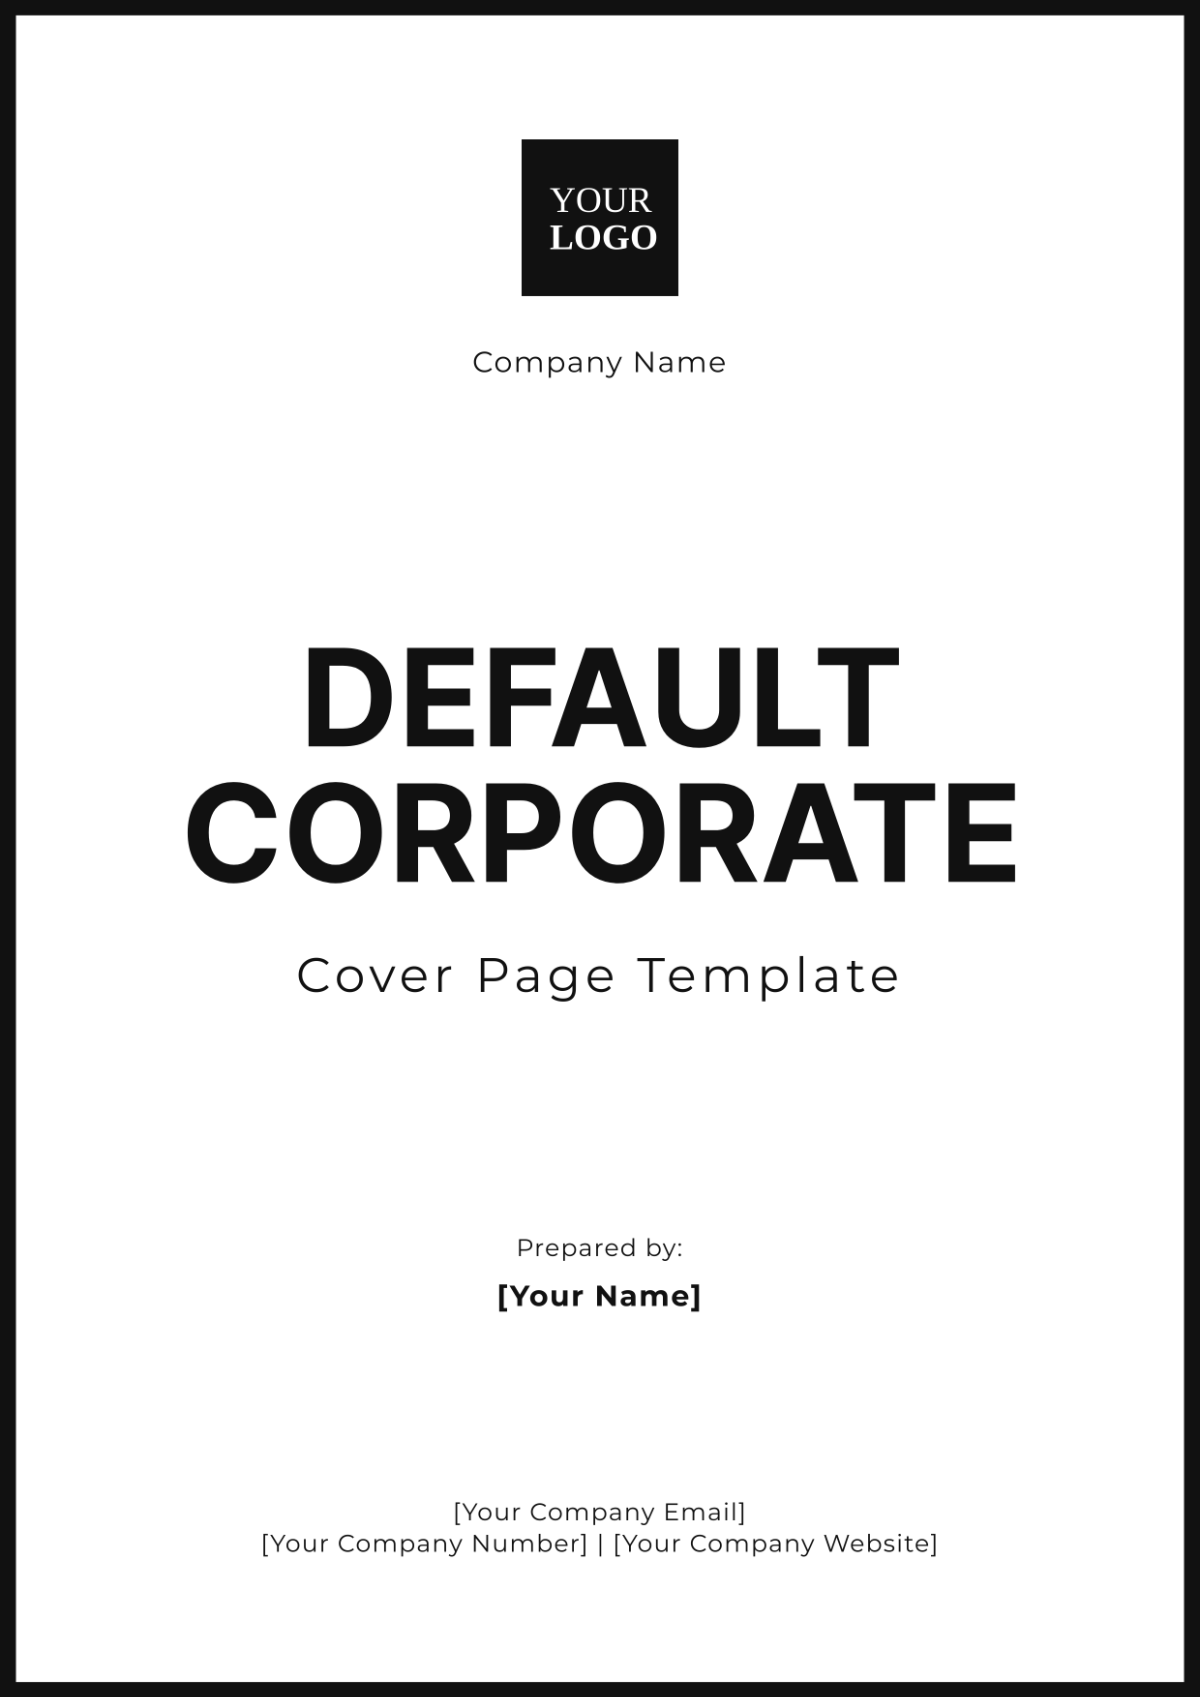 Default Corporate Cover Page